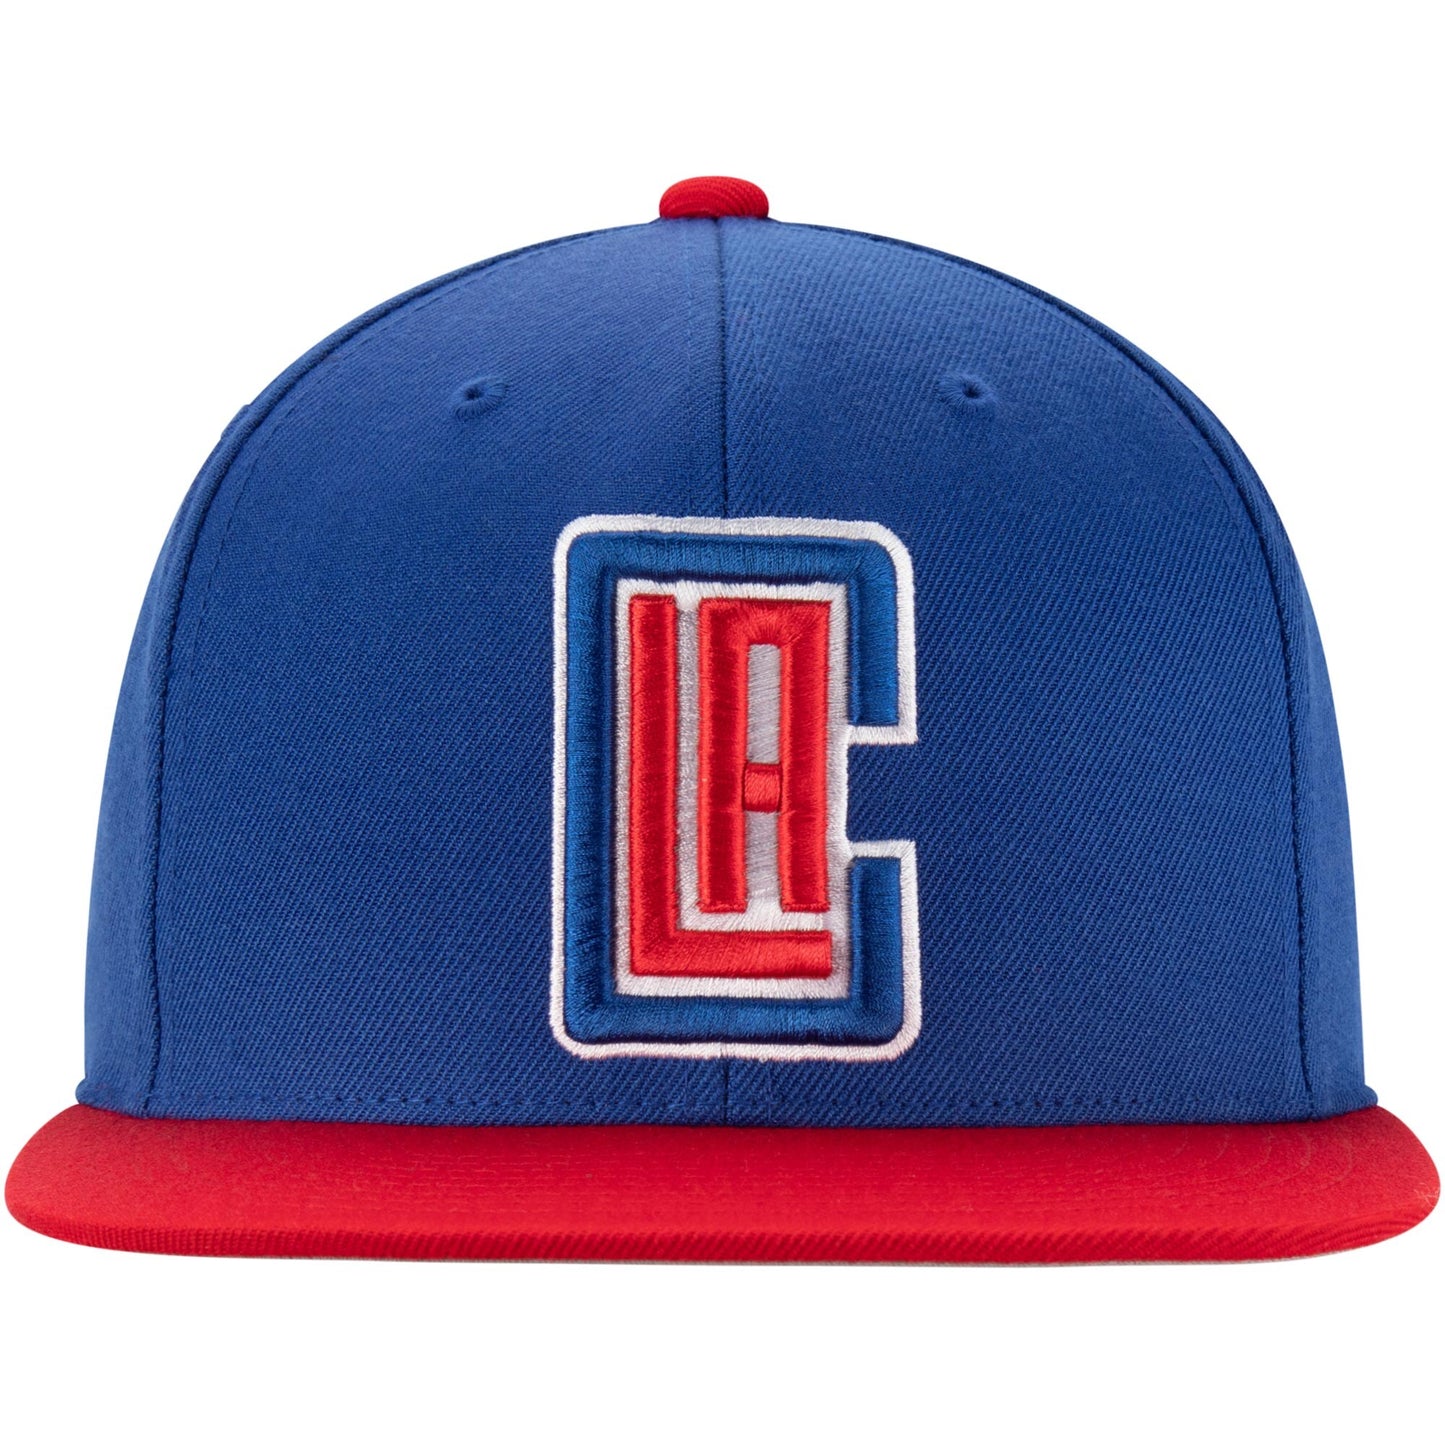 Mens NBA Los Angeles Clippers Royal/Red Wool 2 Tone Snapback Hat By Mitchell And Ness